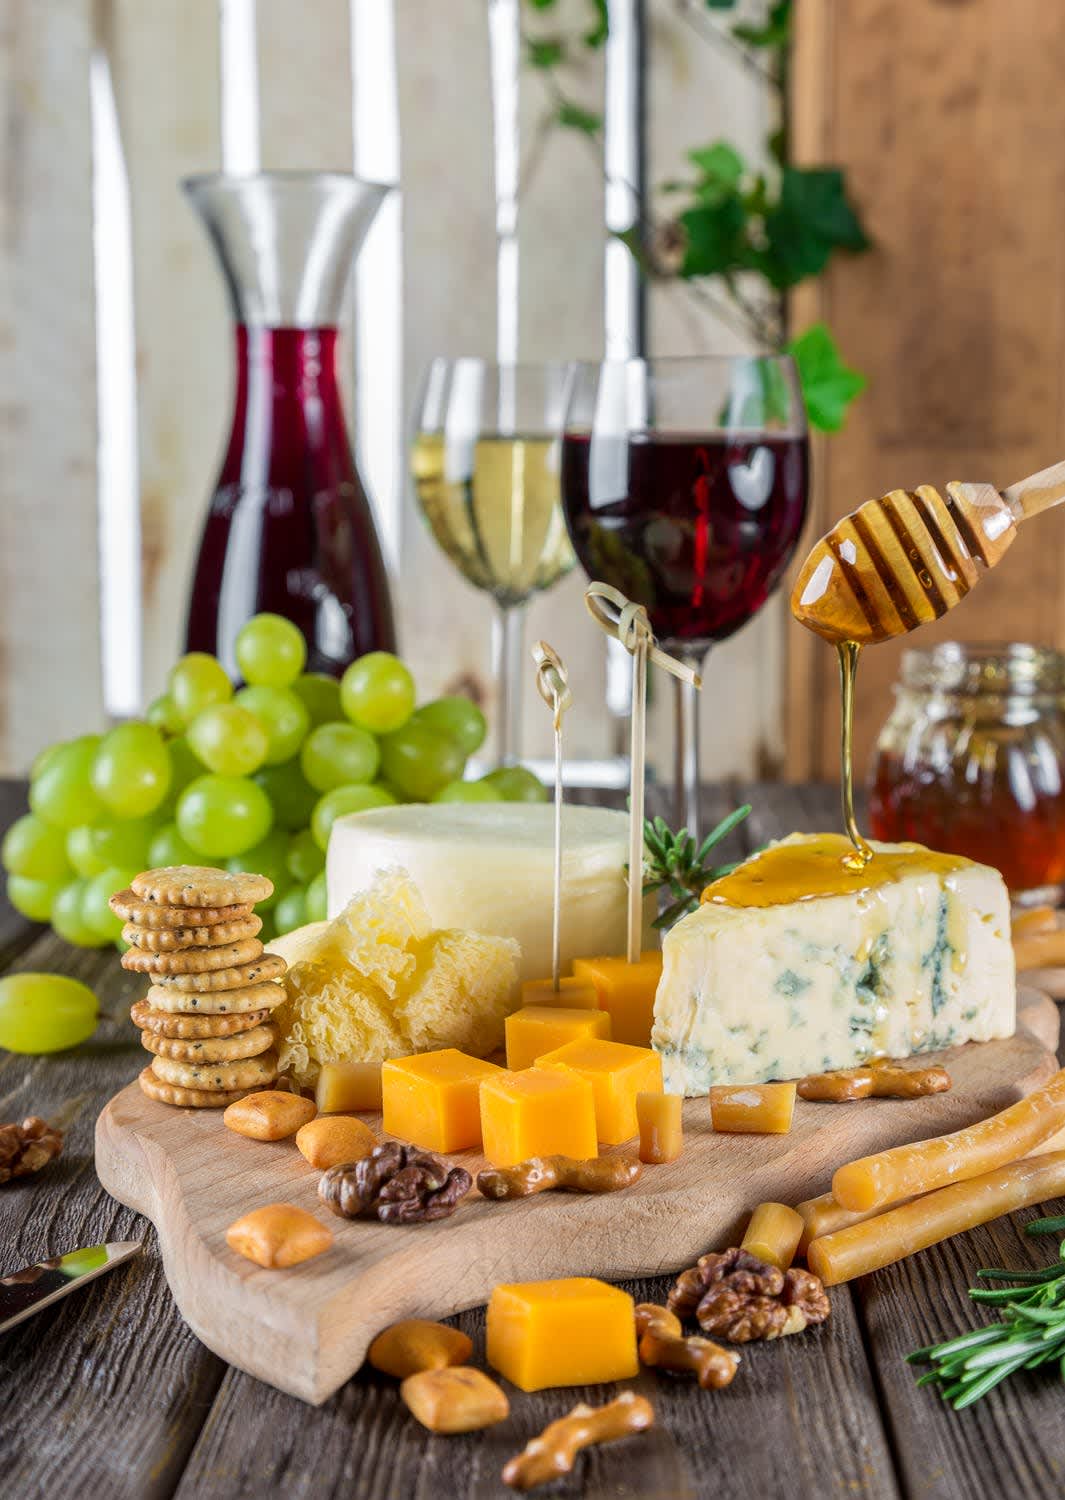 A spread of various cheeses with red and white wines